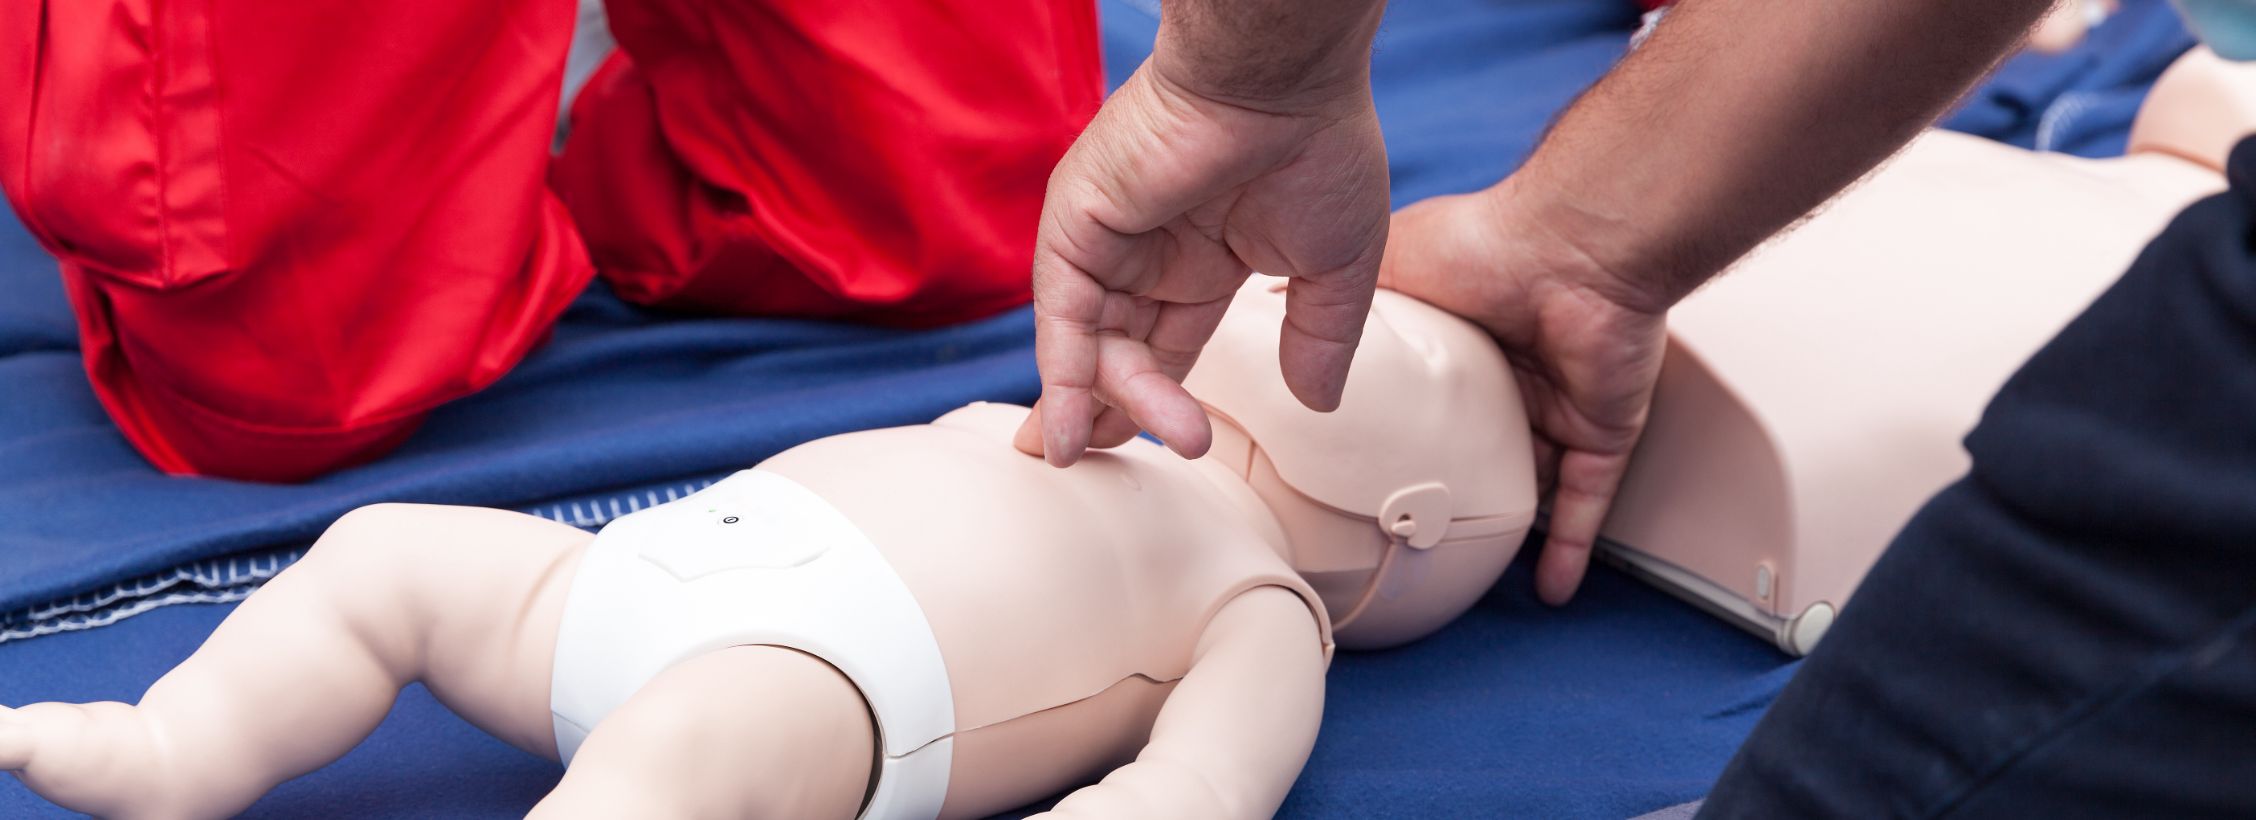 Child and baby first aid main